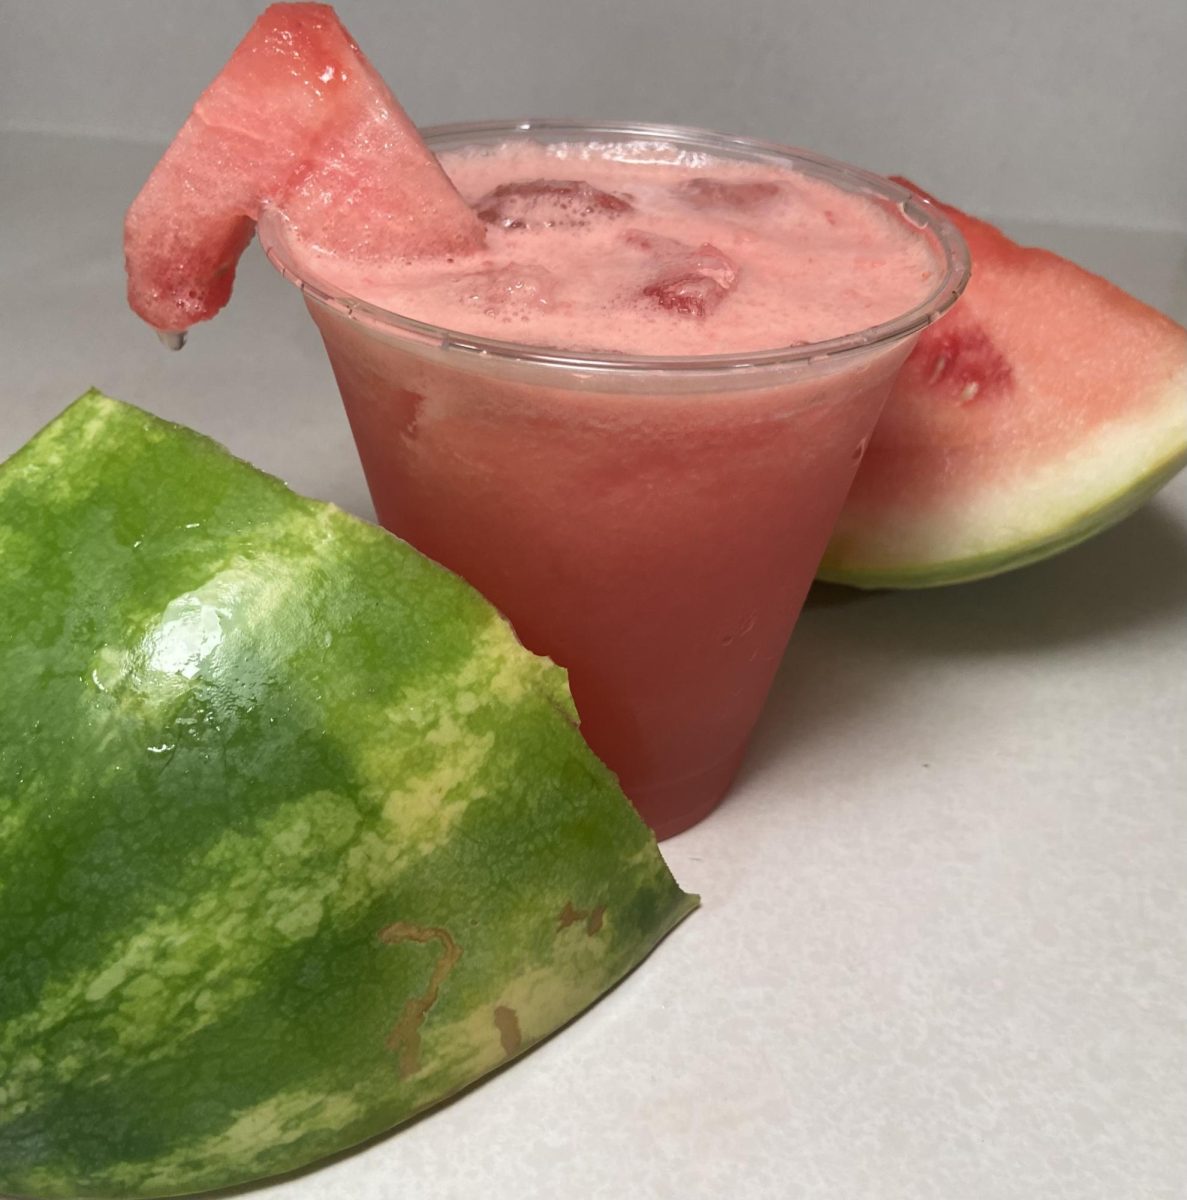 Refreshing+watermelon+agua+fresca+with+some+fresh+watermelon+on+the+side+makes+for+a+tasty+sweet+treat%2C+even+in+winter%21